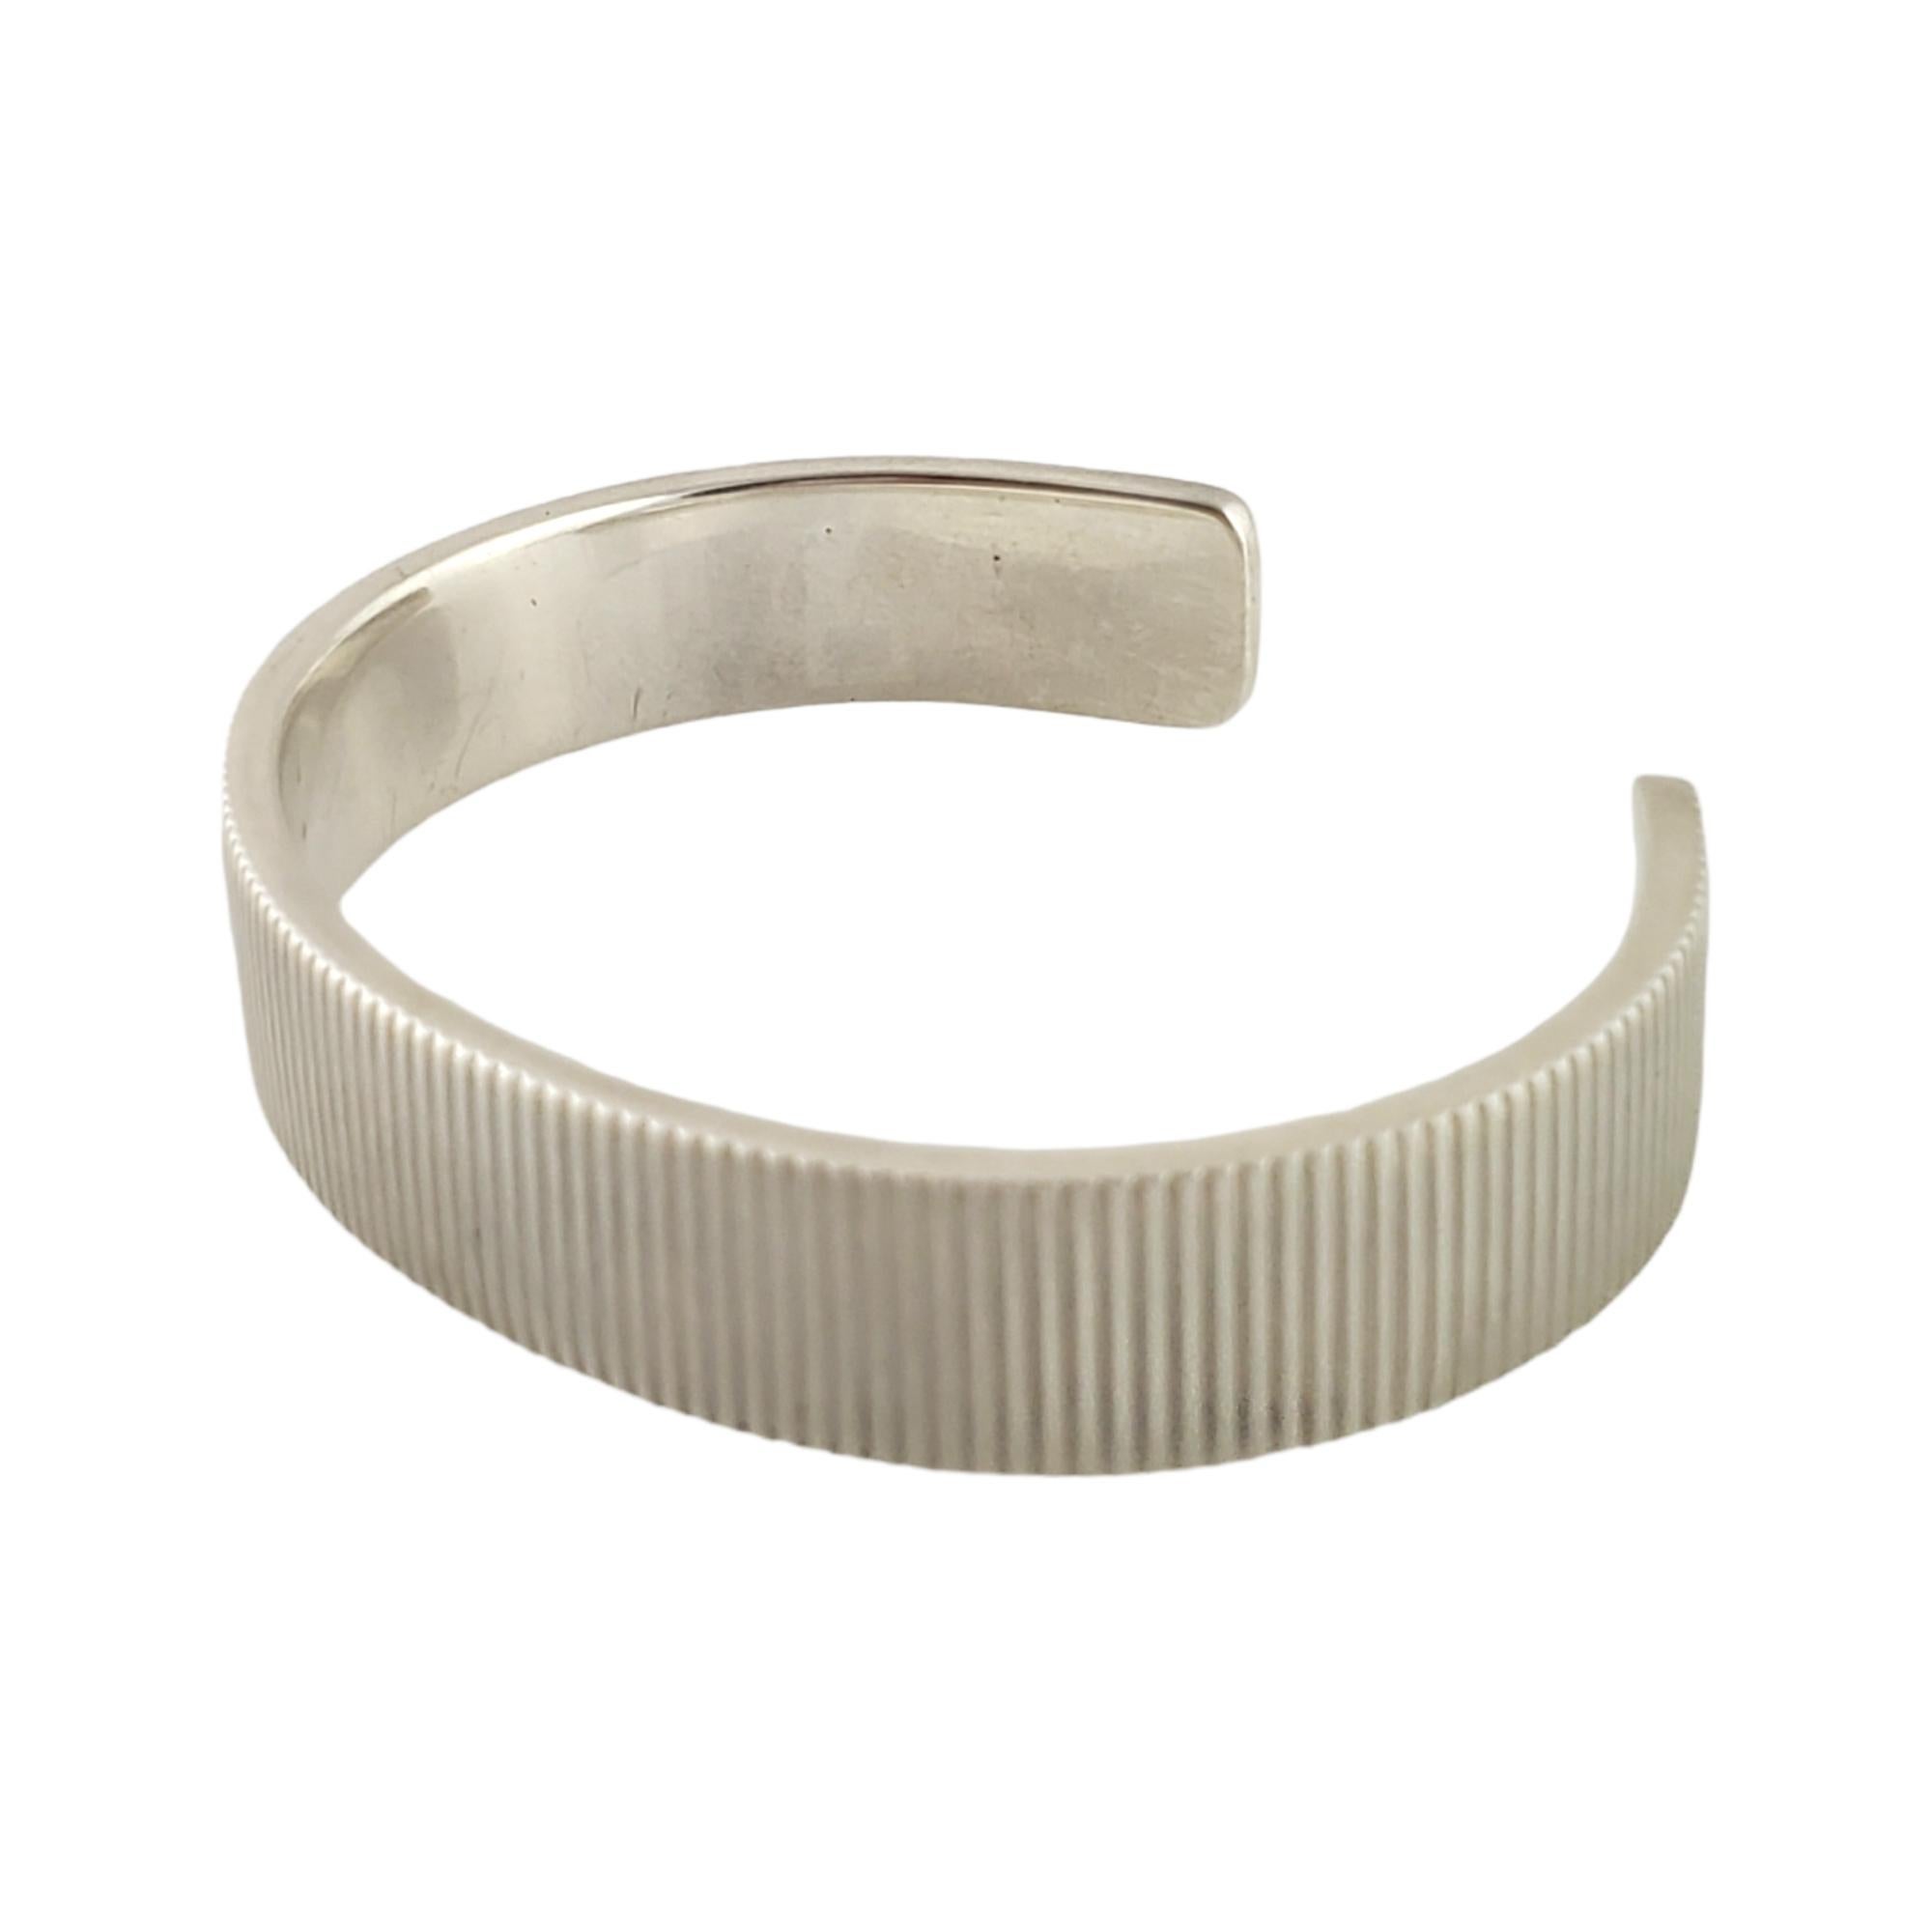 Sterling Silver Coin Edge Cuff Bracelet by Tiffany & Co, circa 2003.

Authentic Tiffany cuff bracelet featuring a ribbed design. Tiffany pouch and box not included.

Measures approx 6